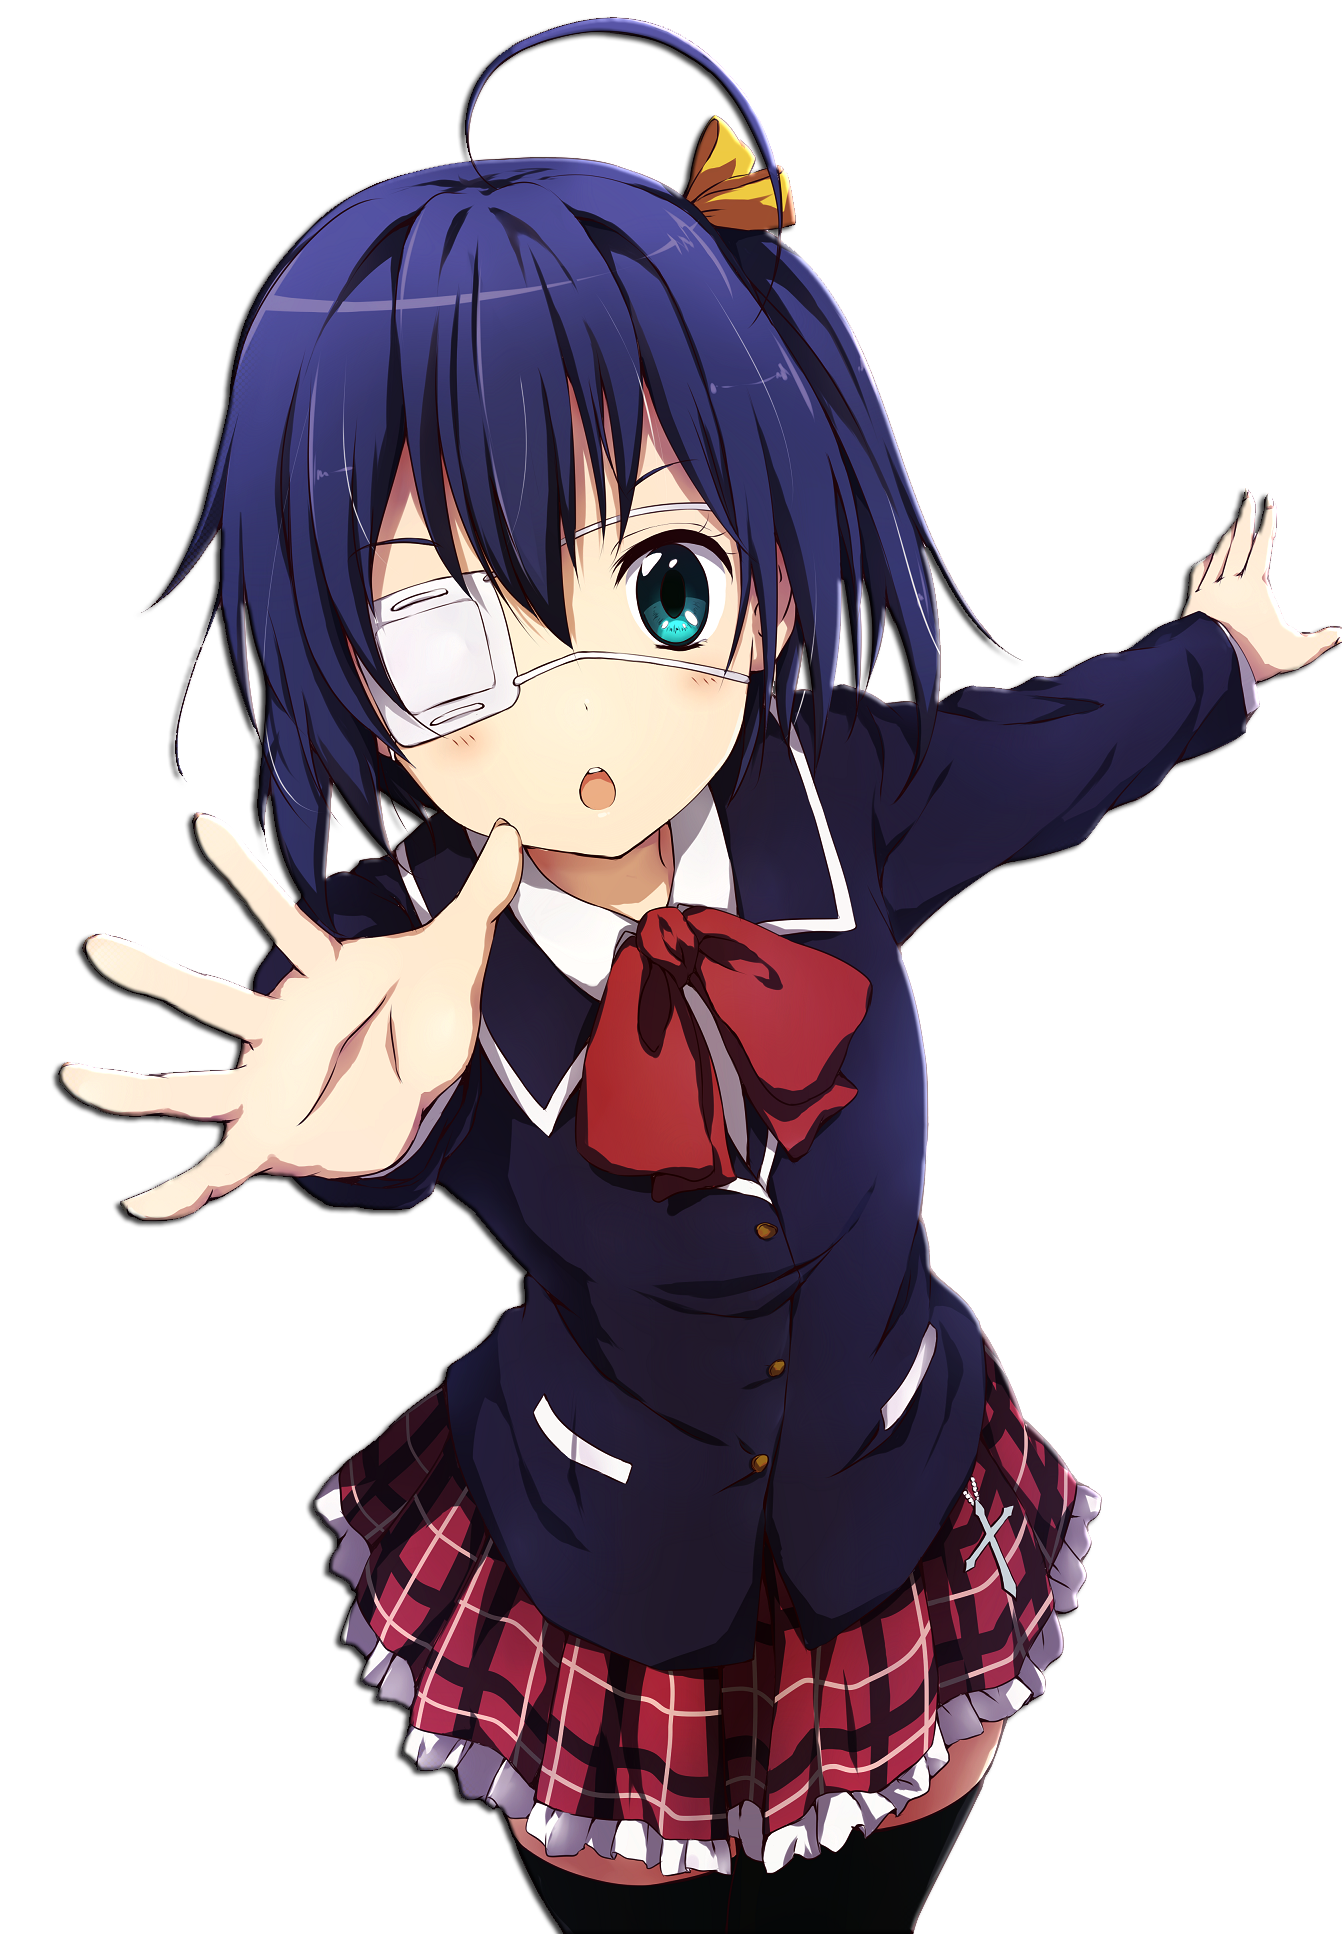 Anime png images. Transparent pluspng pic image